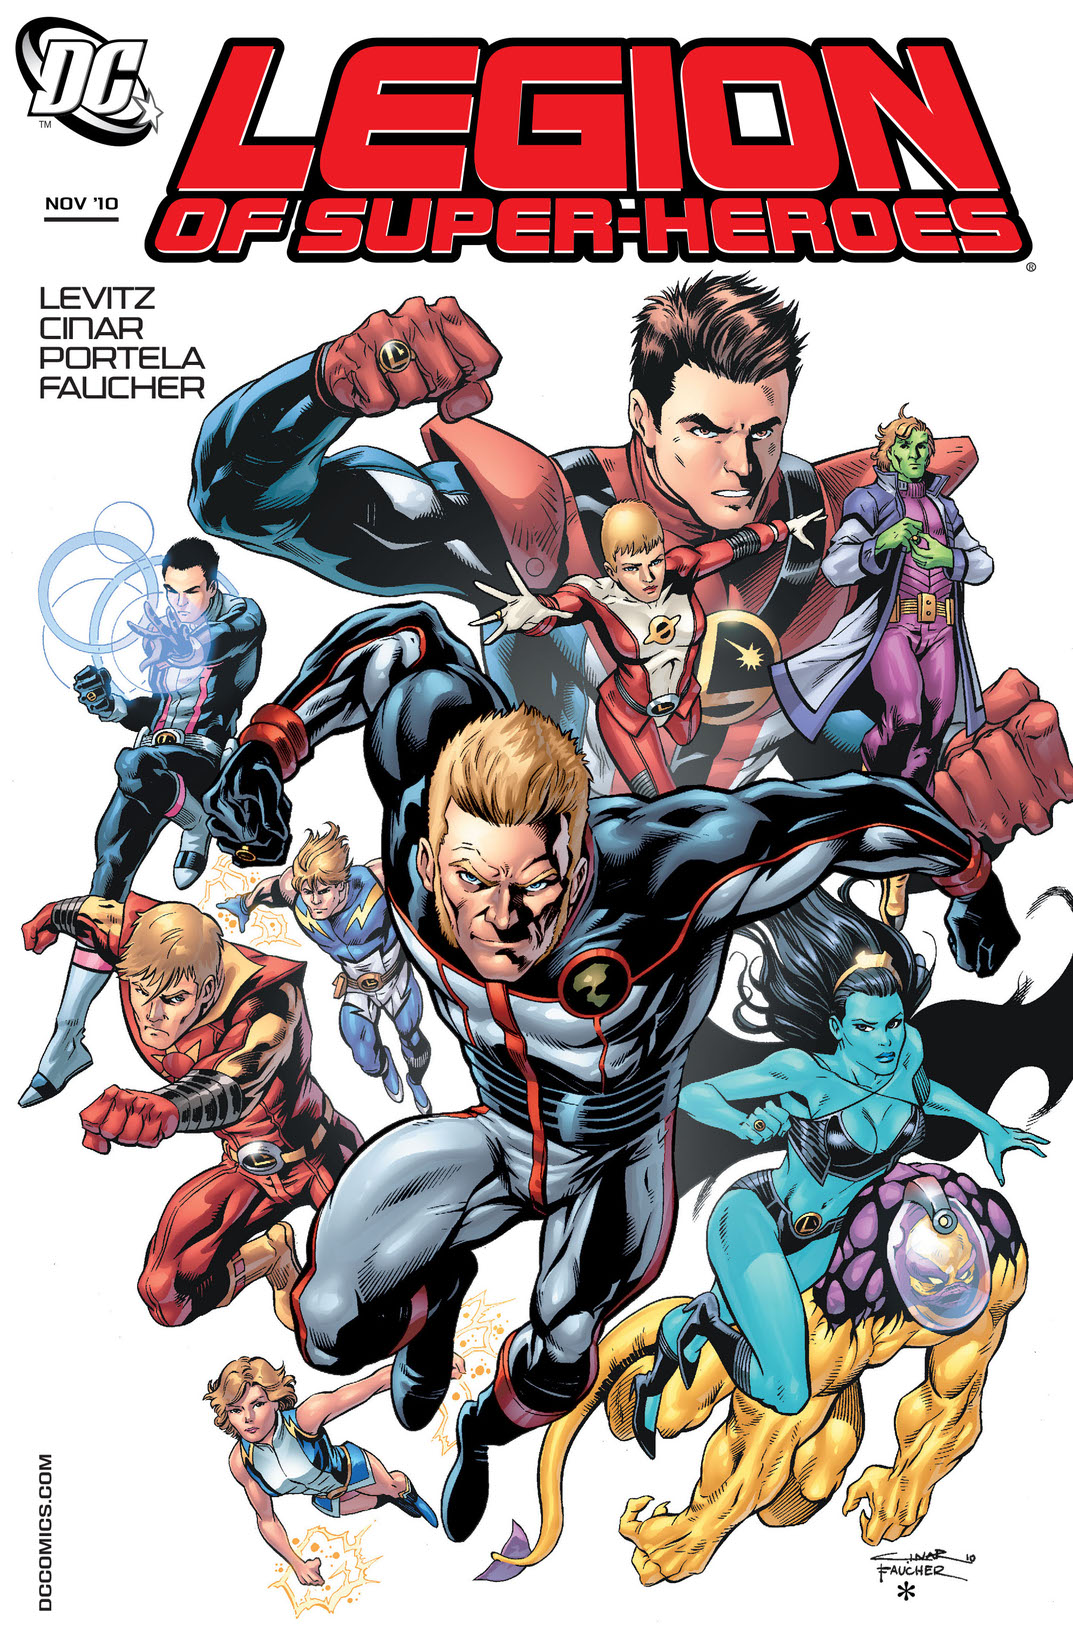 Legion of Super-Heroes (2010-) #5 preview images